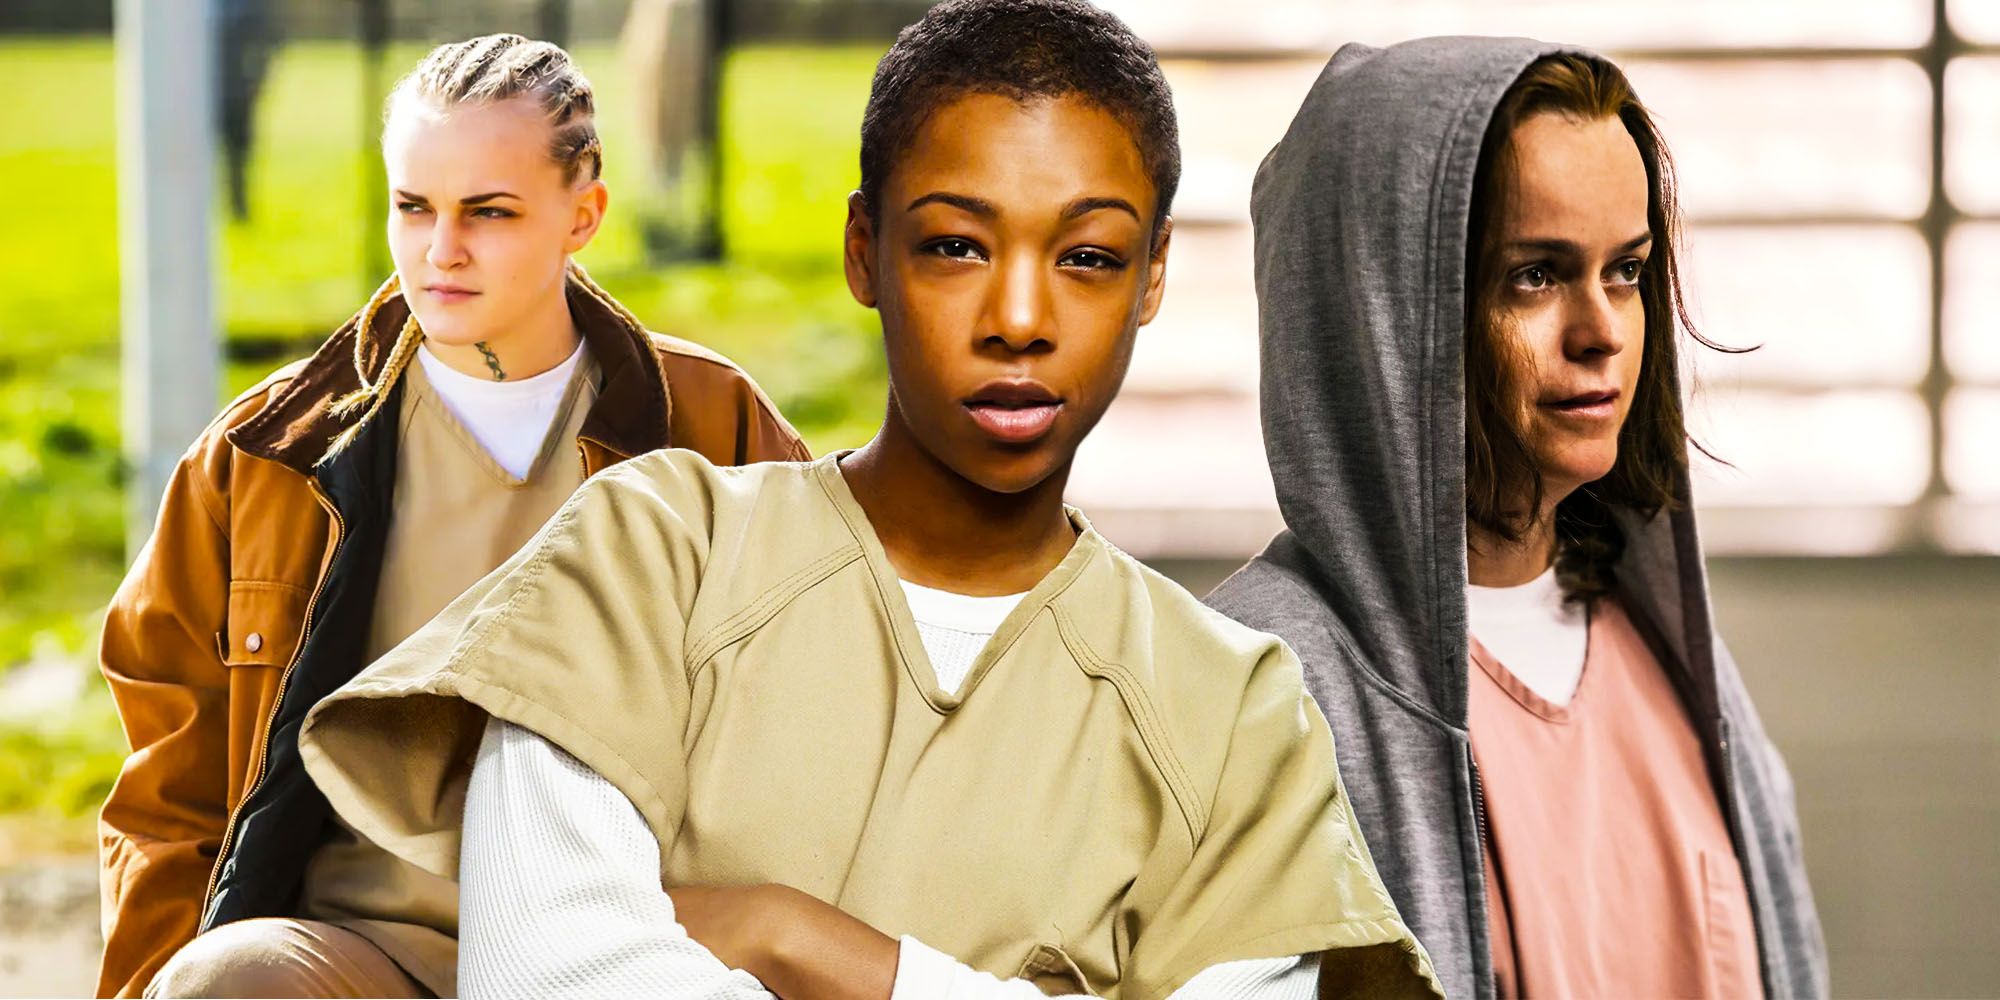 Orange is the new black character deaths pennsatucky Poussey tricia